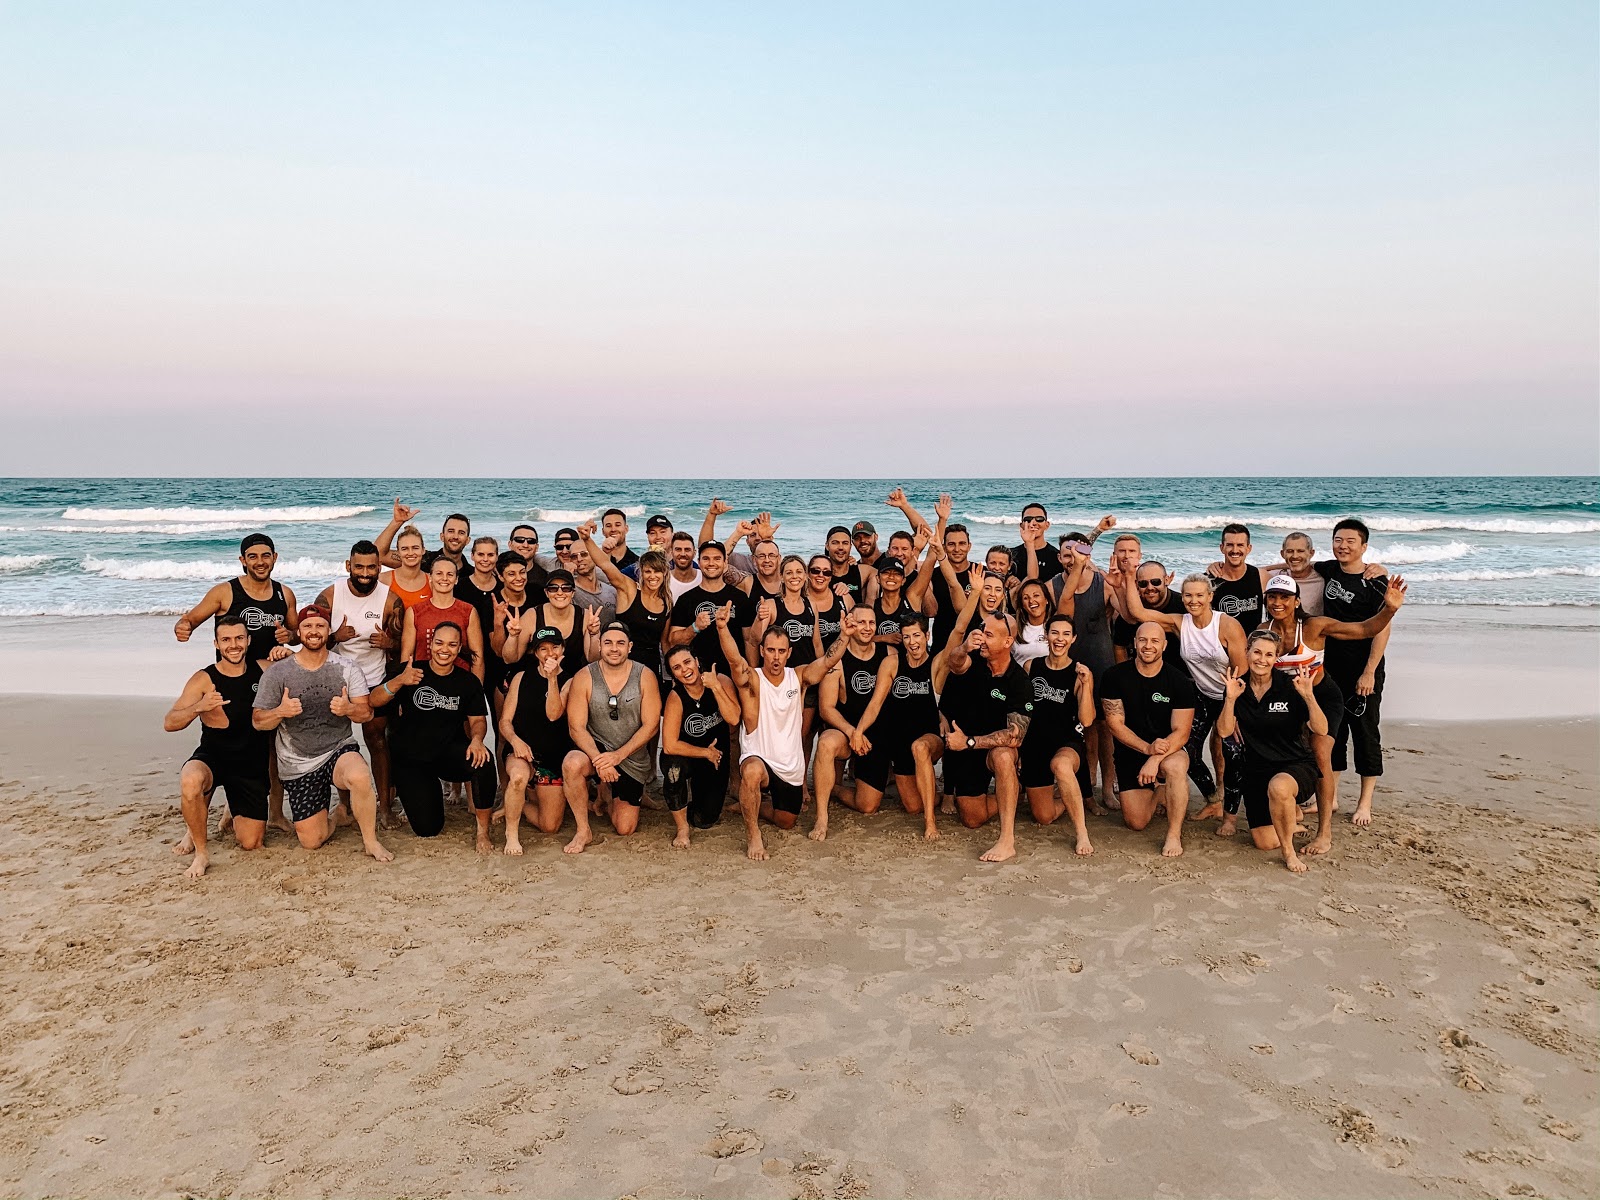 12RND Fitness and UBX Training Franchise group at our 2019 Annual Summit